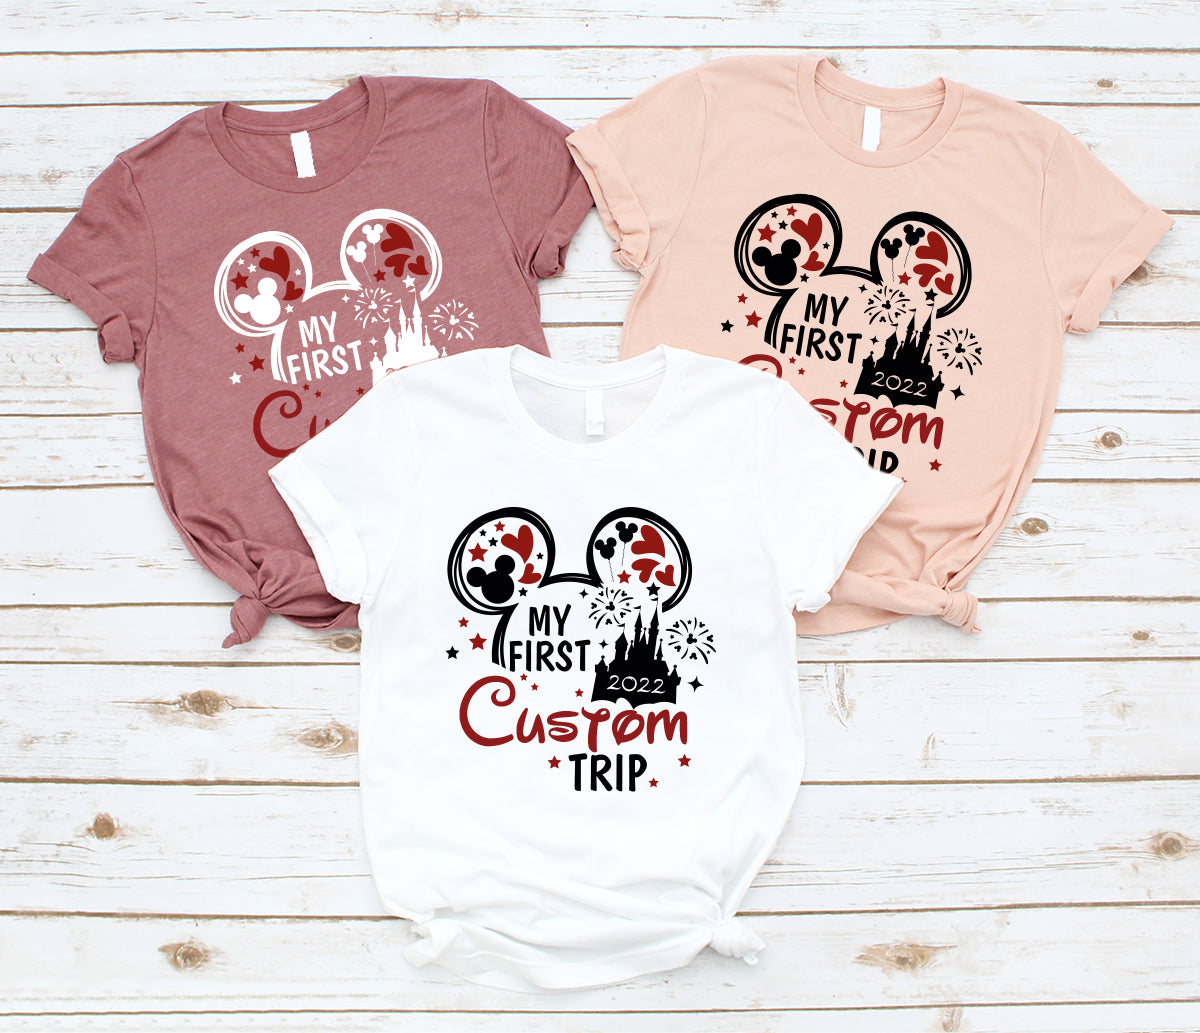 Boys /Girls Mickey Mouse Tee Personalized Family Outfit,Custom